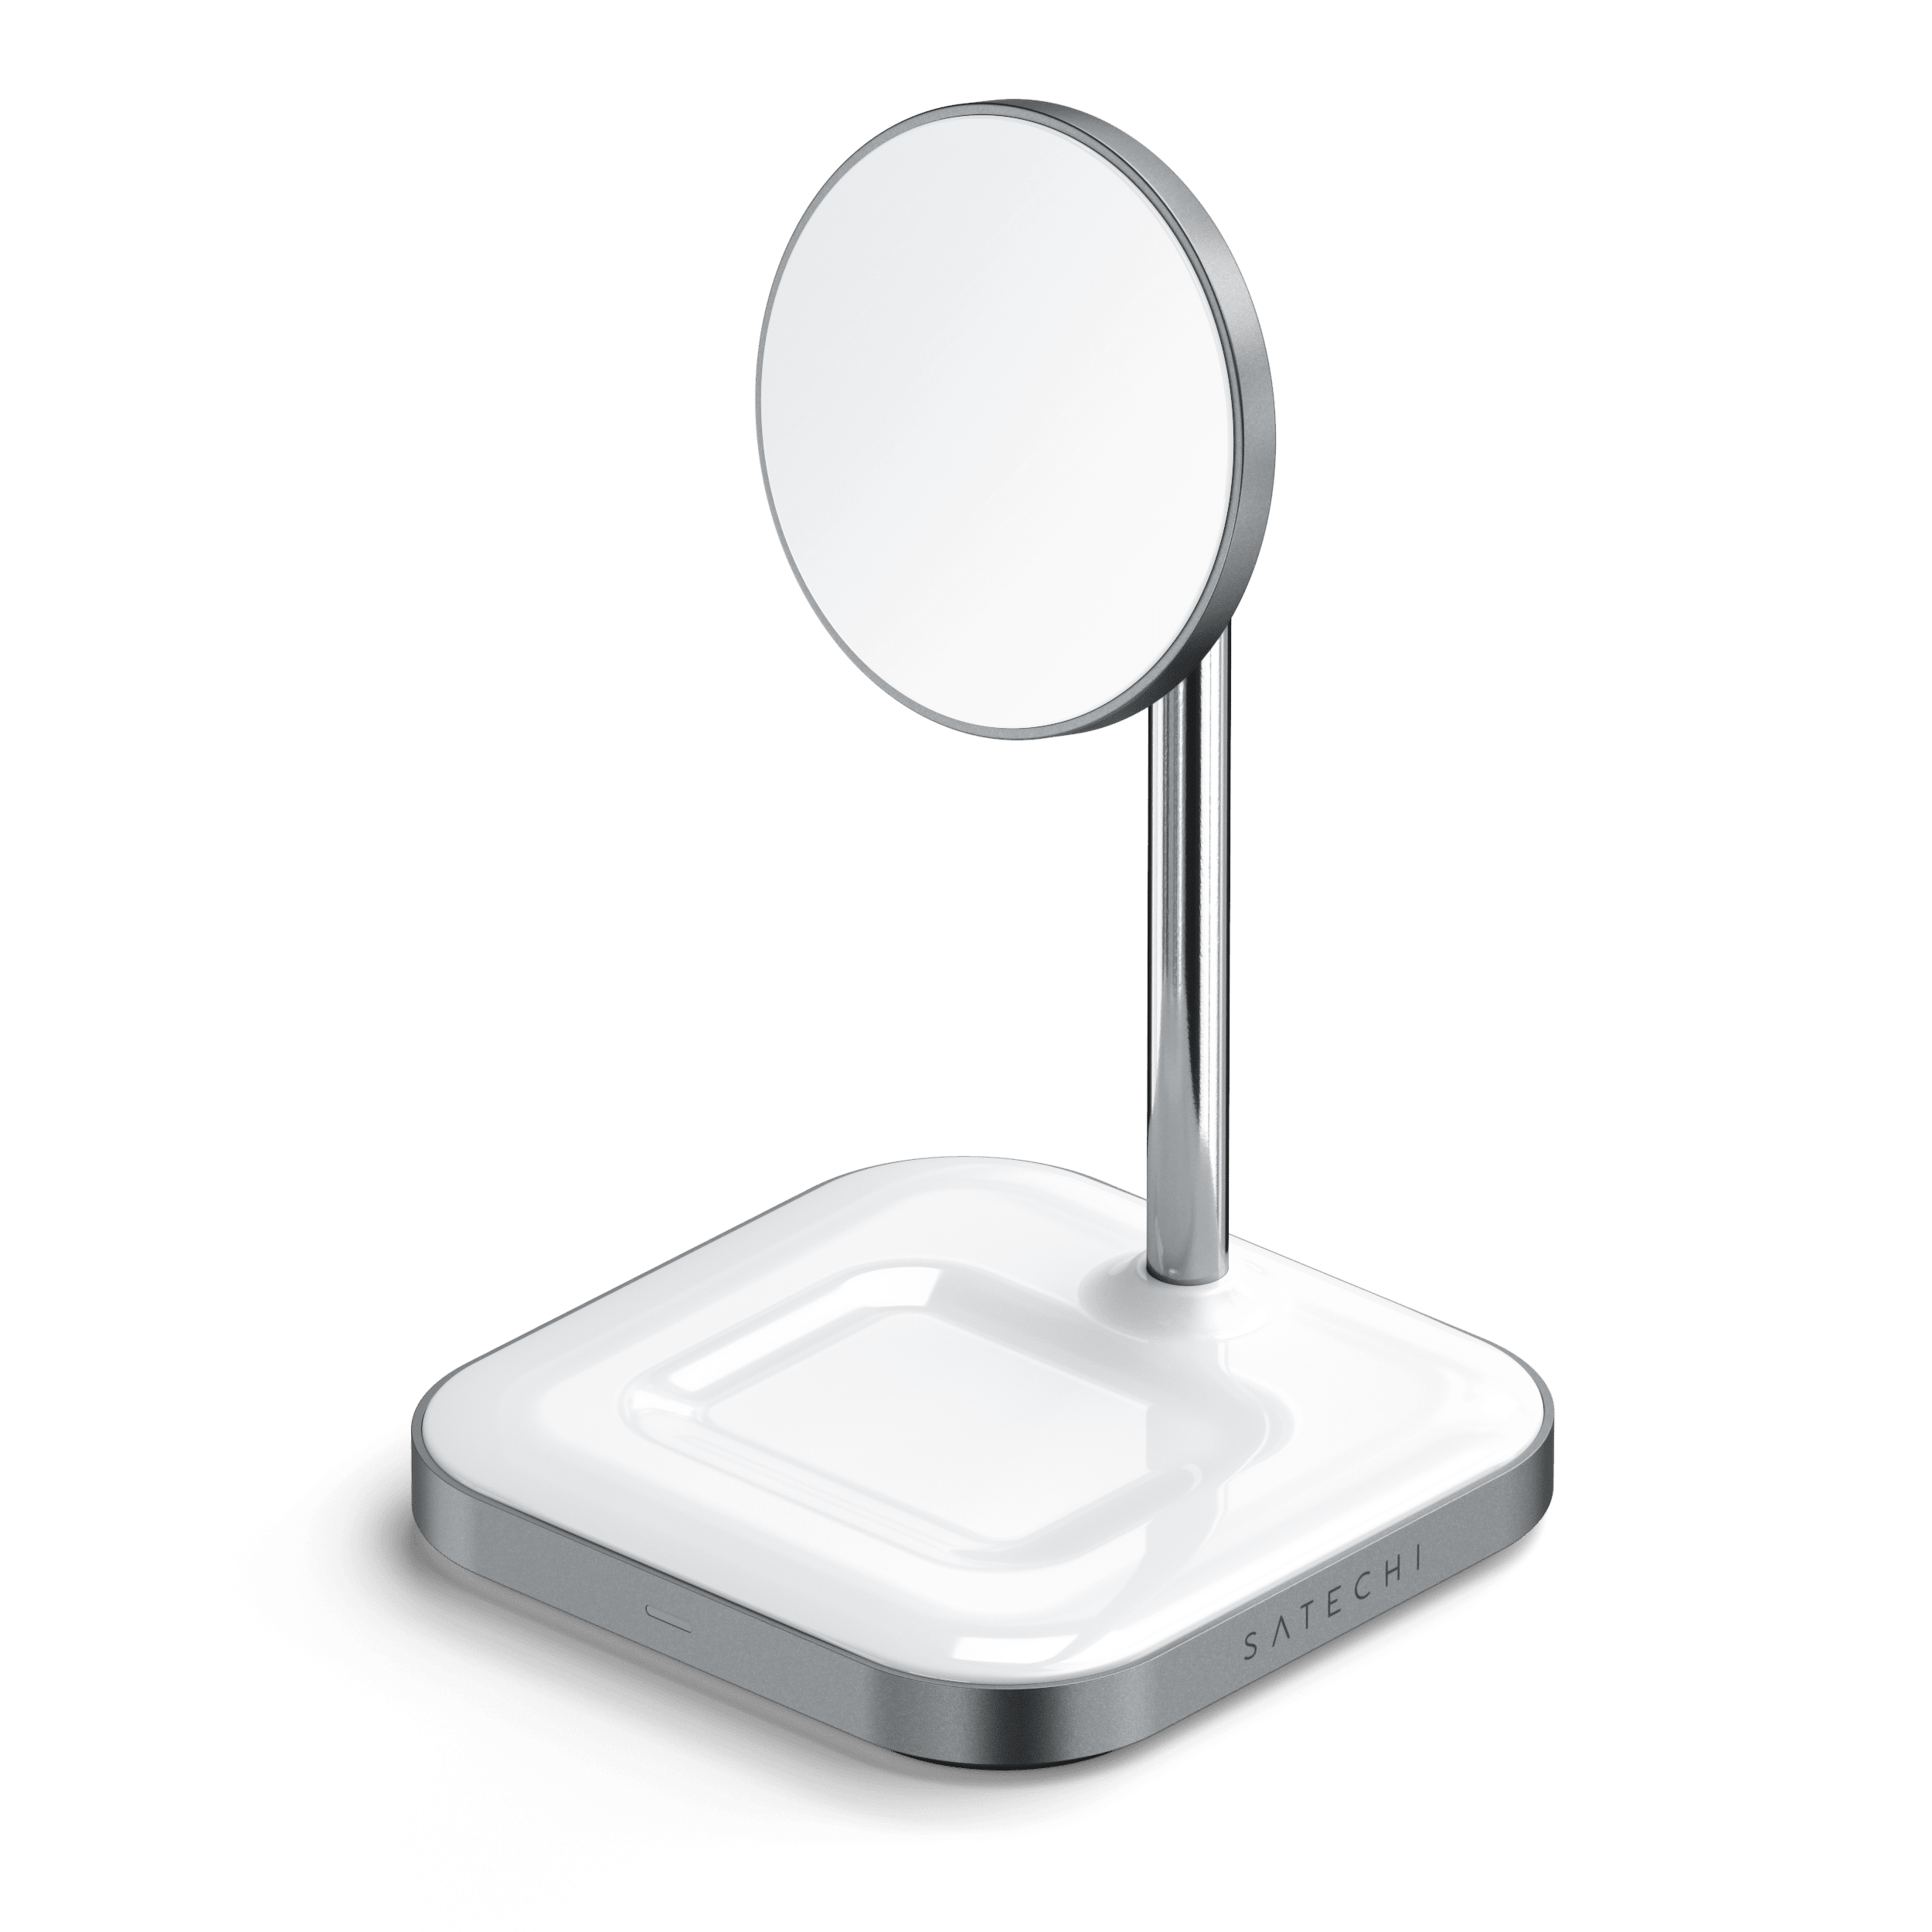 Aluminum 2-in-1 Magnetic Wireless Charging Stand Wireless Chargers Satechi